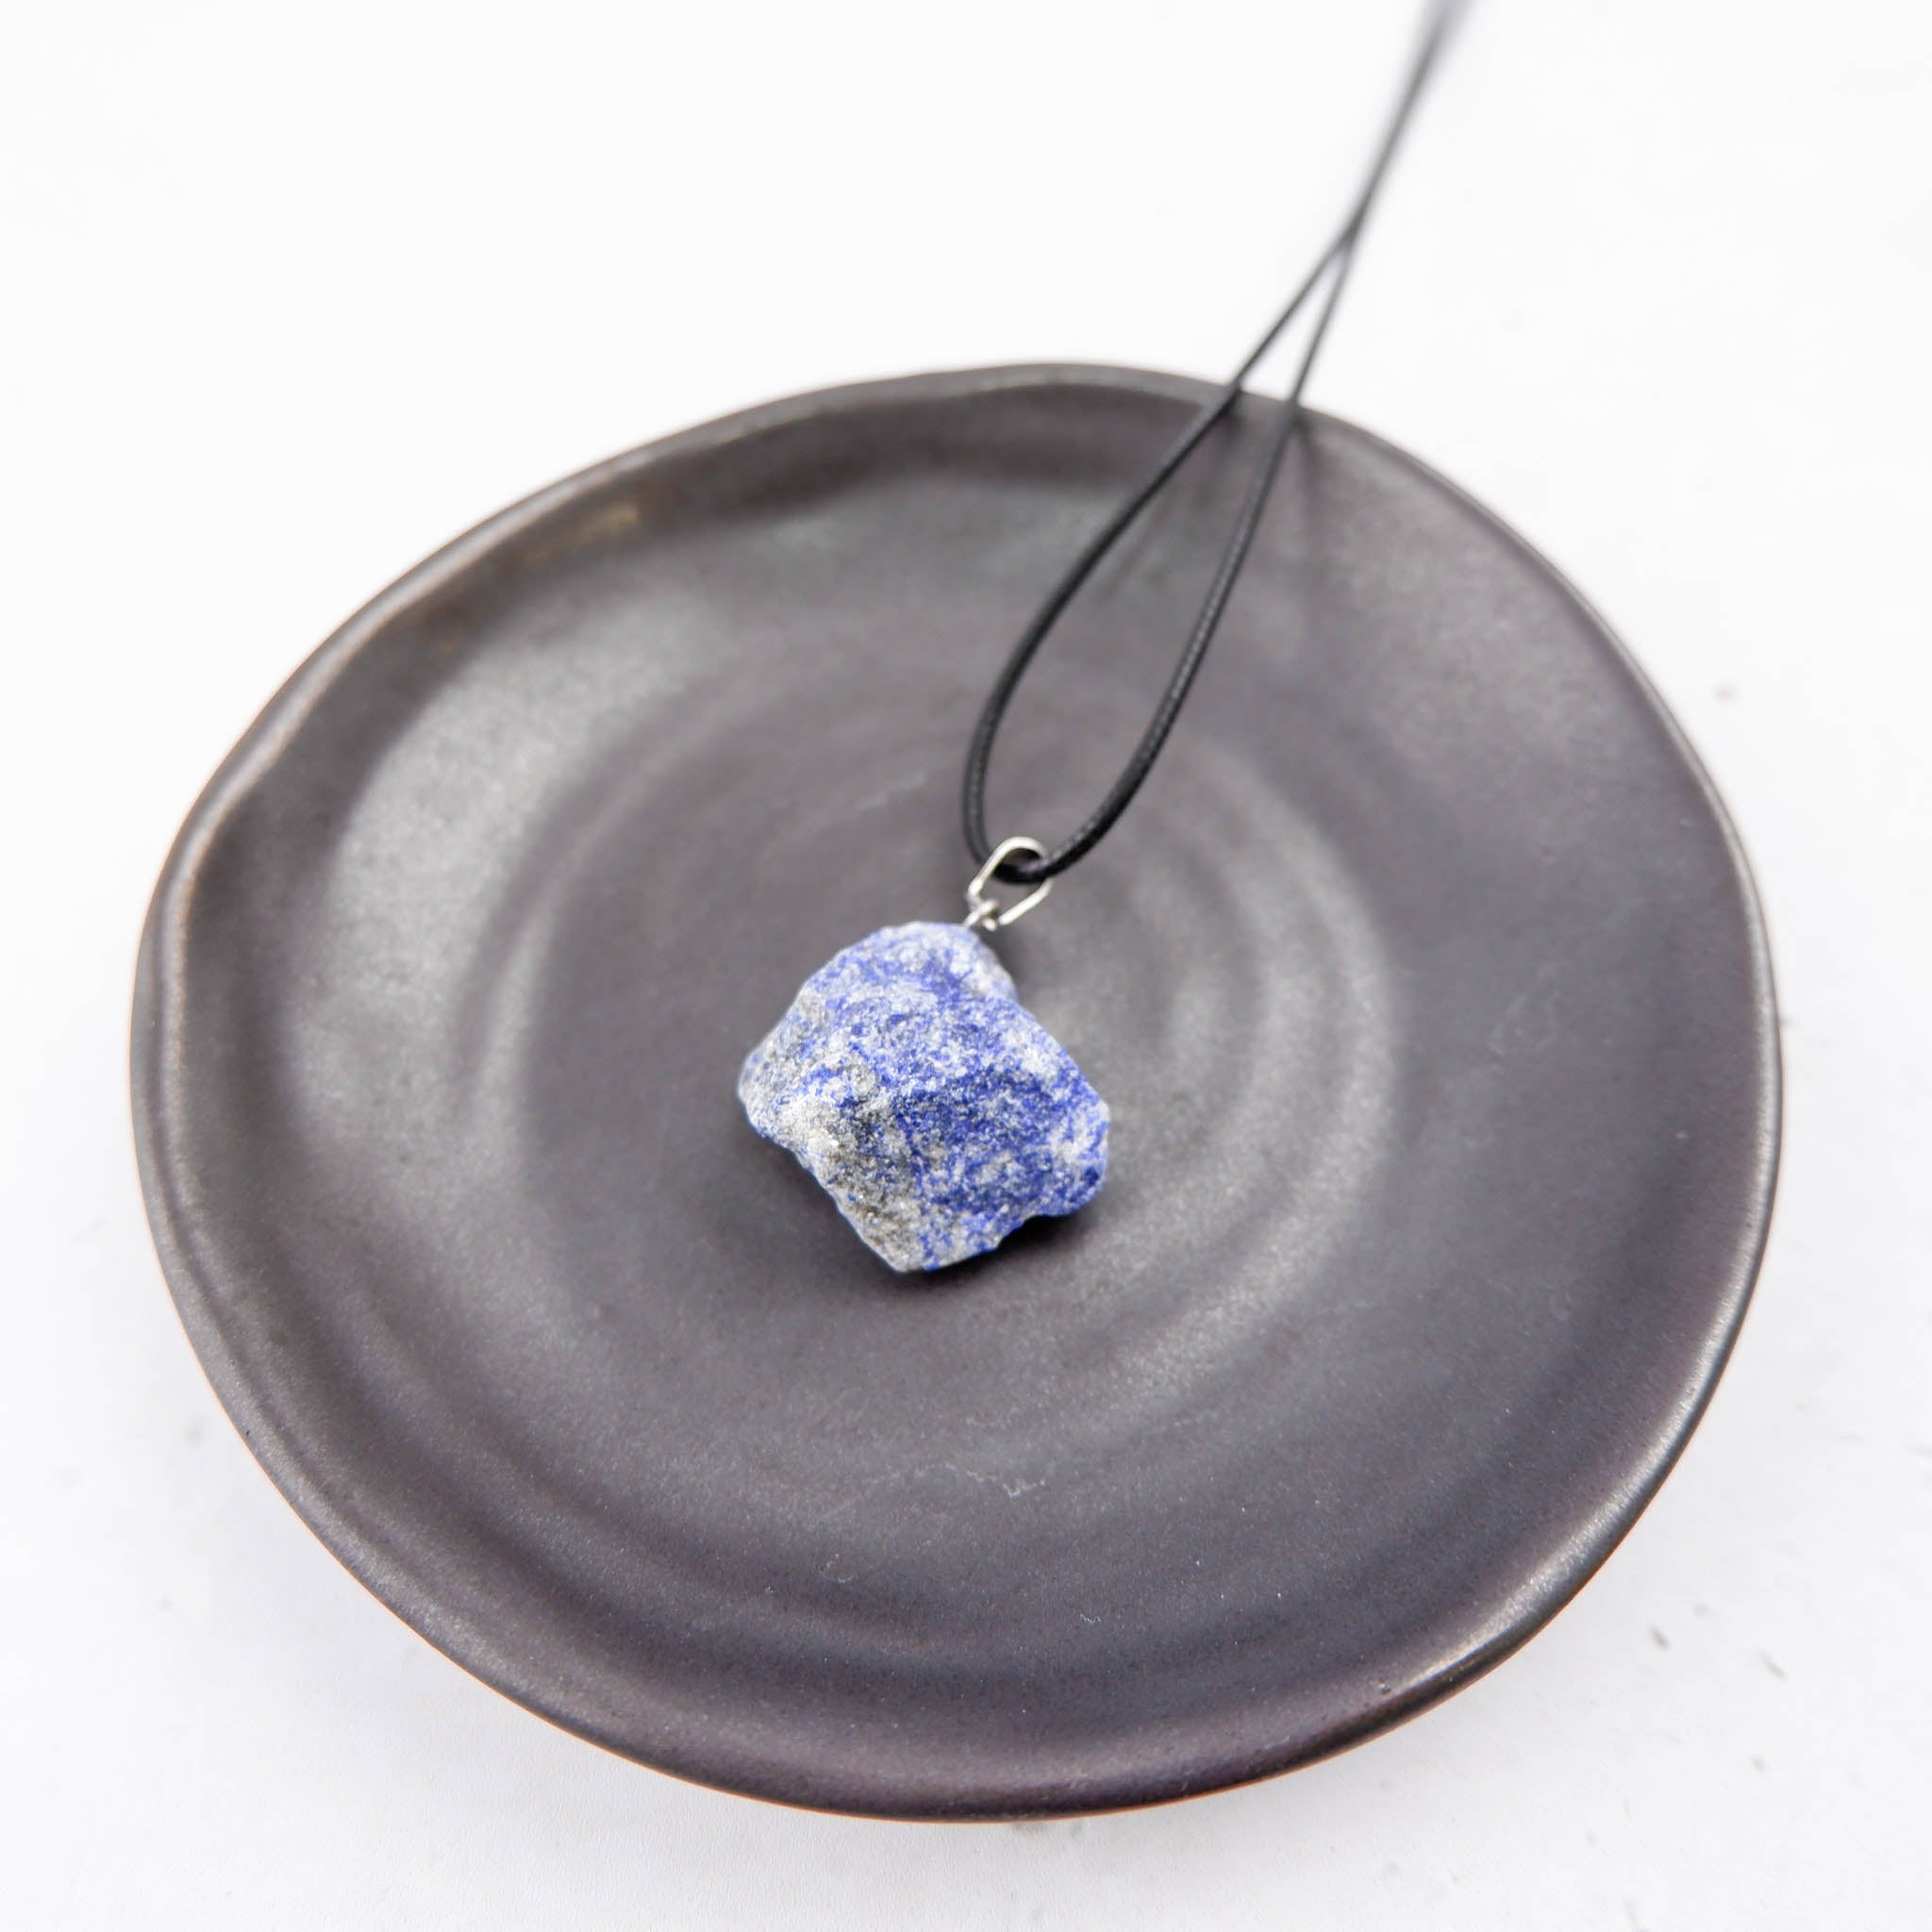 Rough Wax Necklace - Crystal & Stone